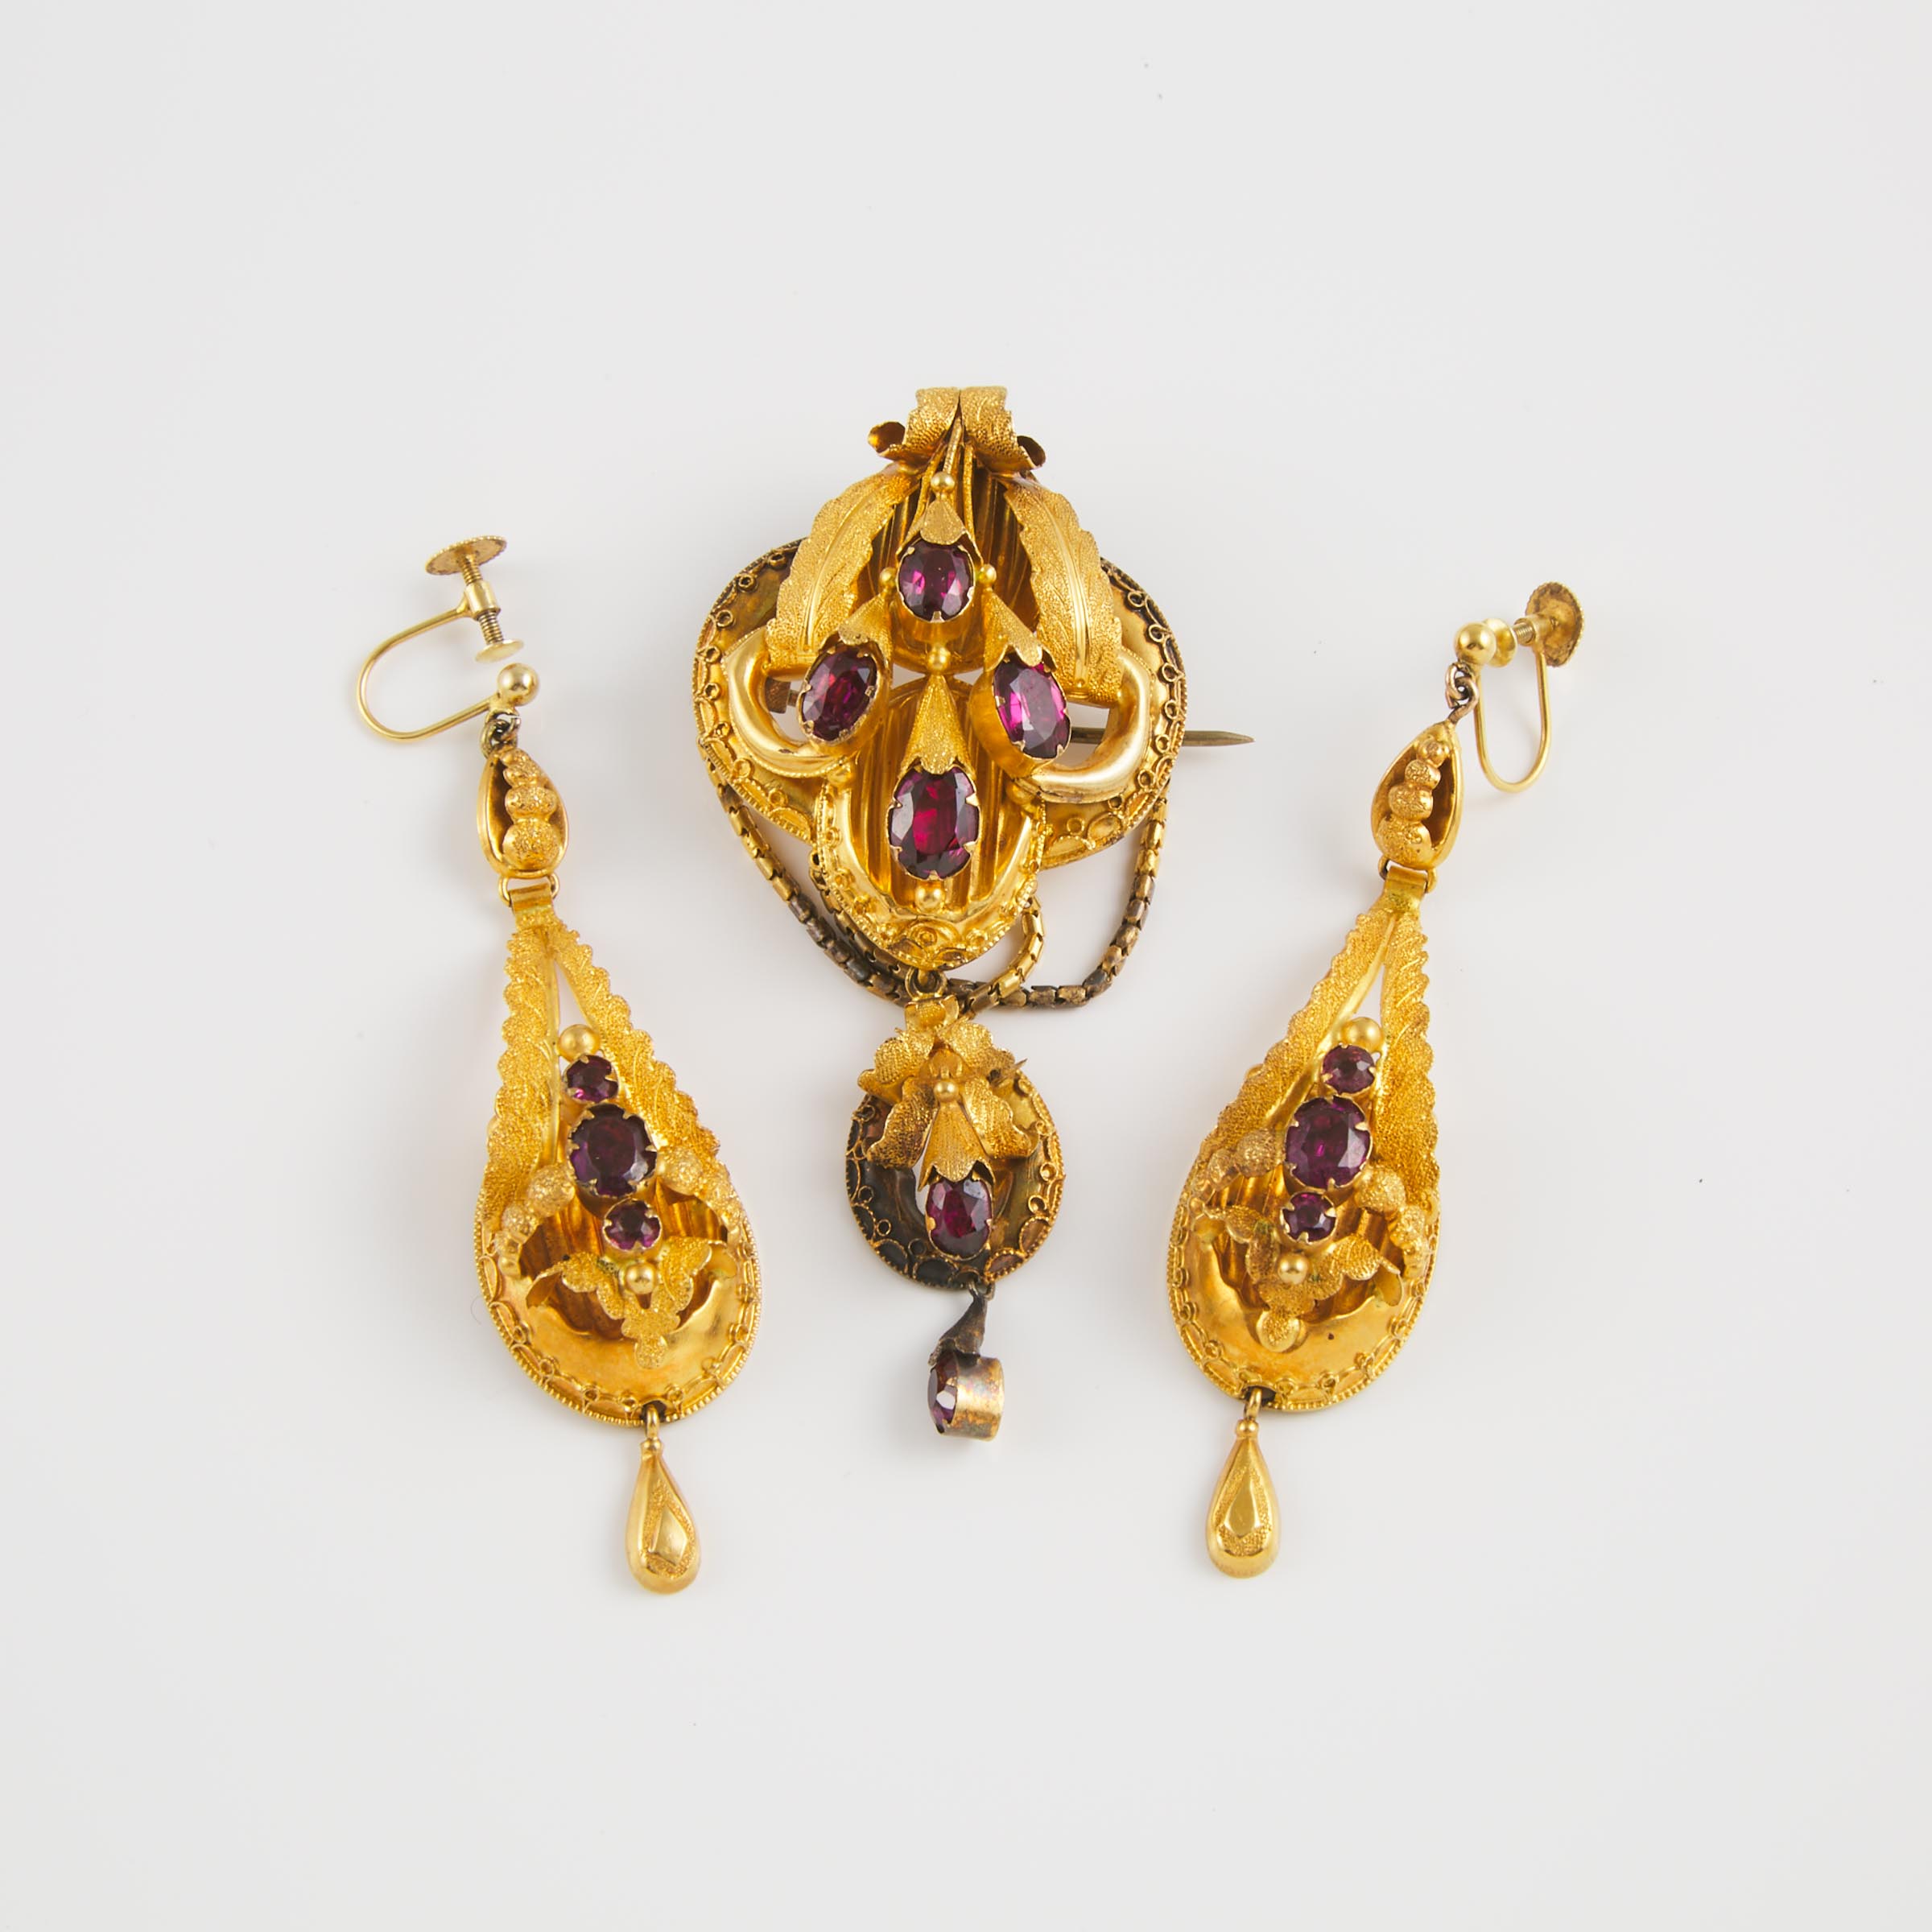 19th Century 18k Yellow Gold Brooch And Screw-Back Drop Earrings